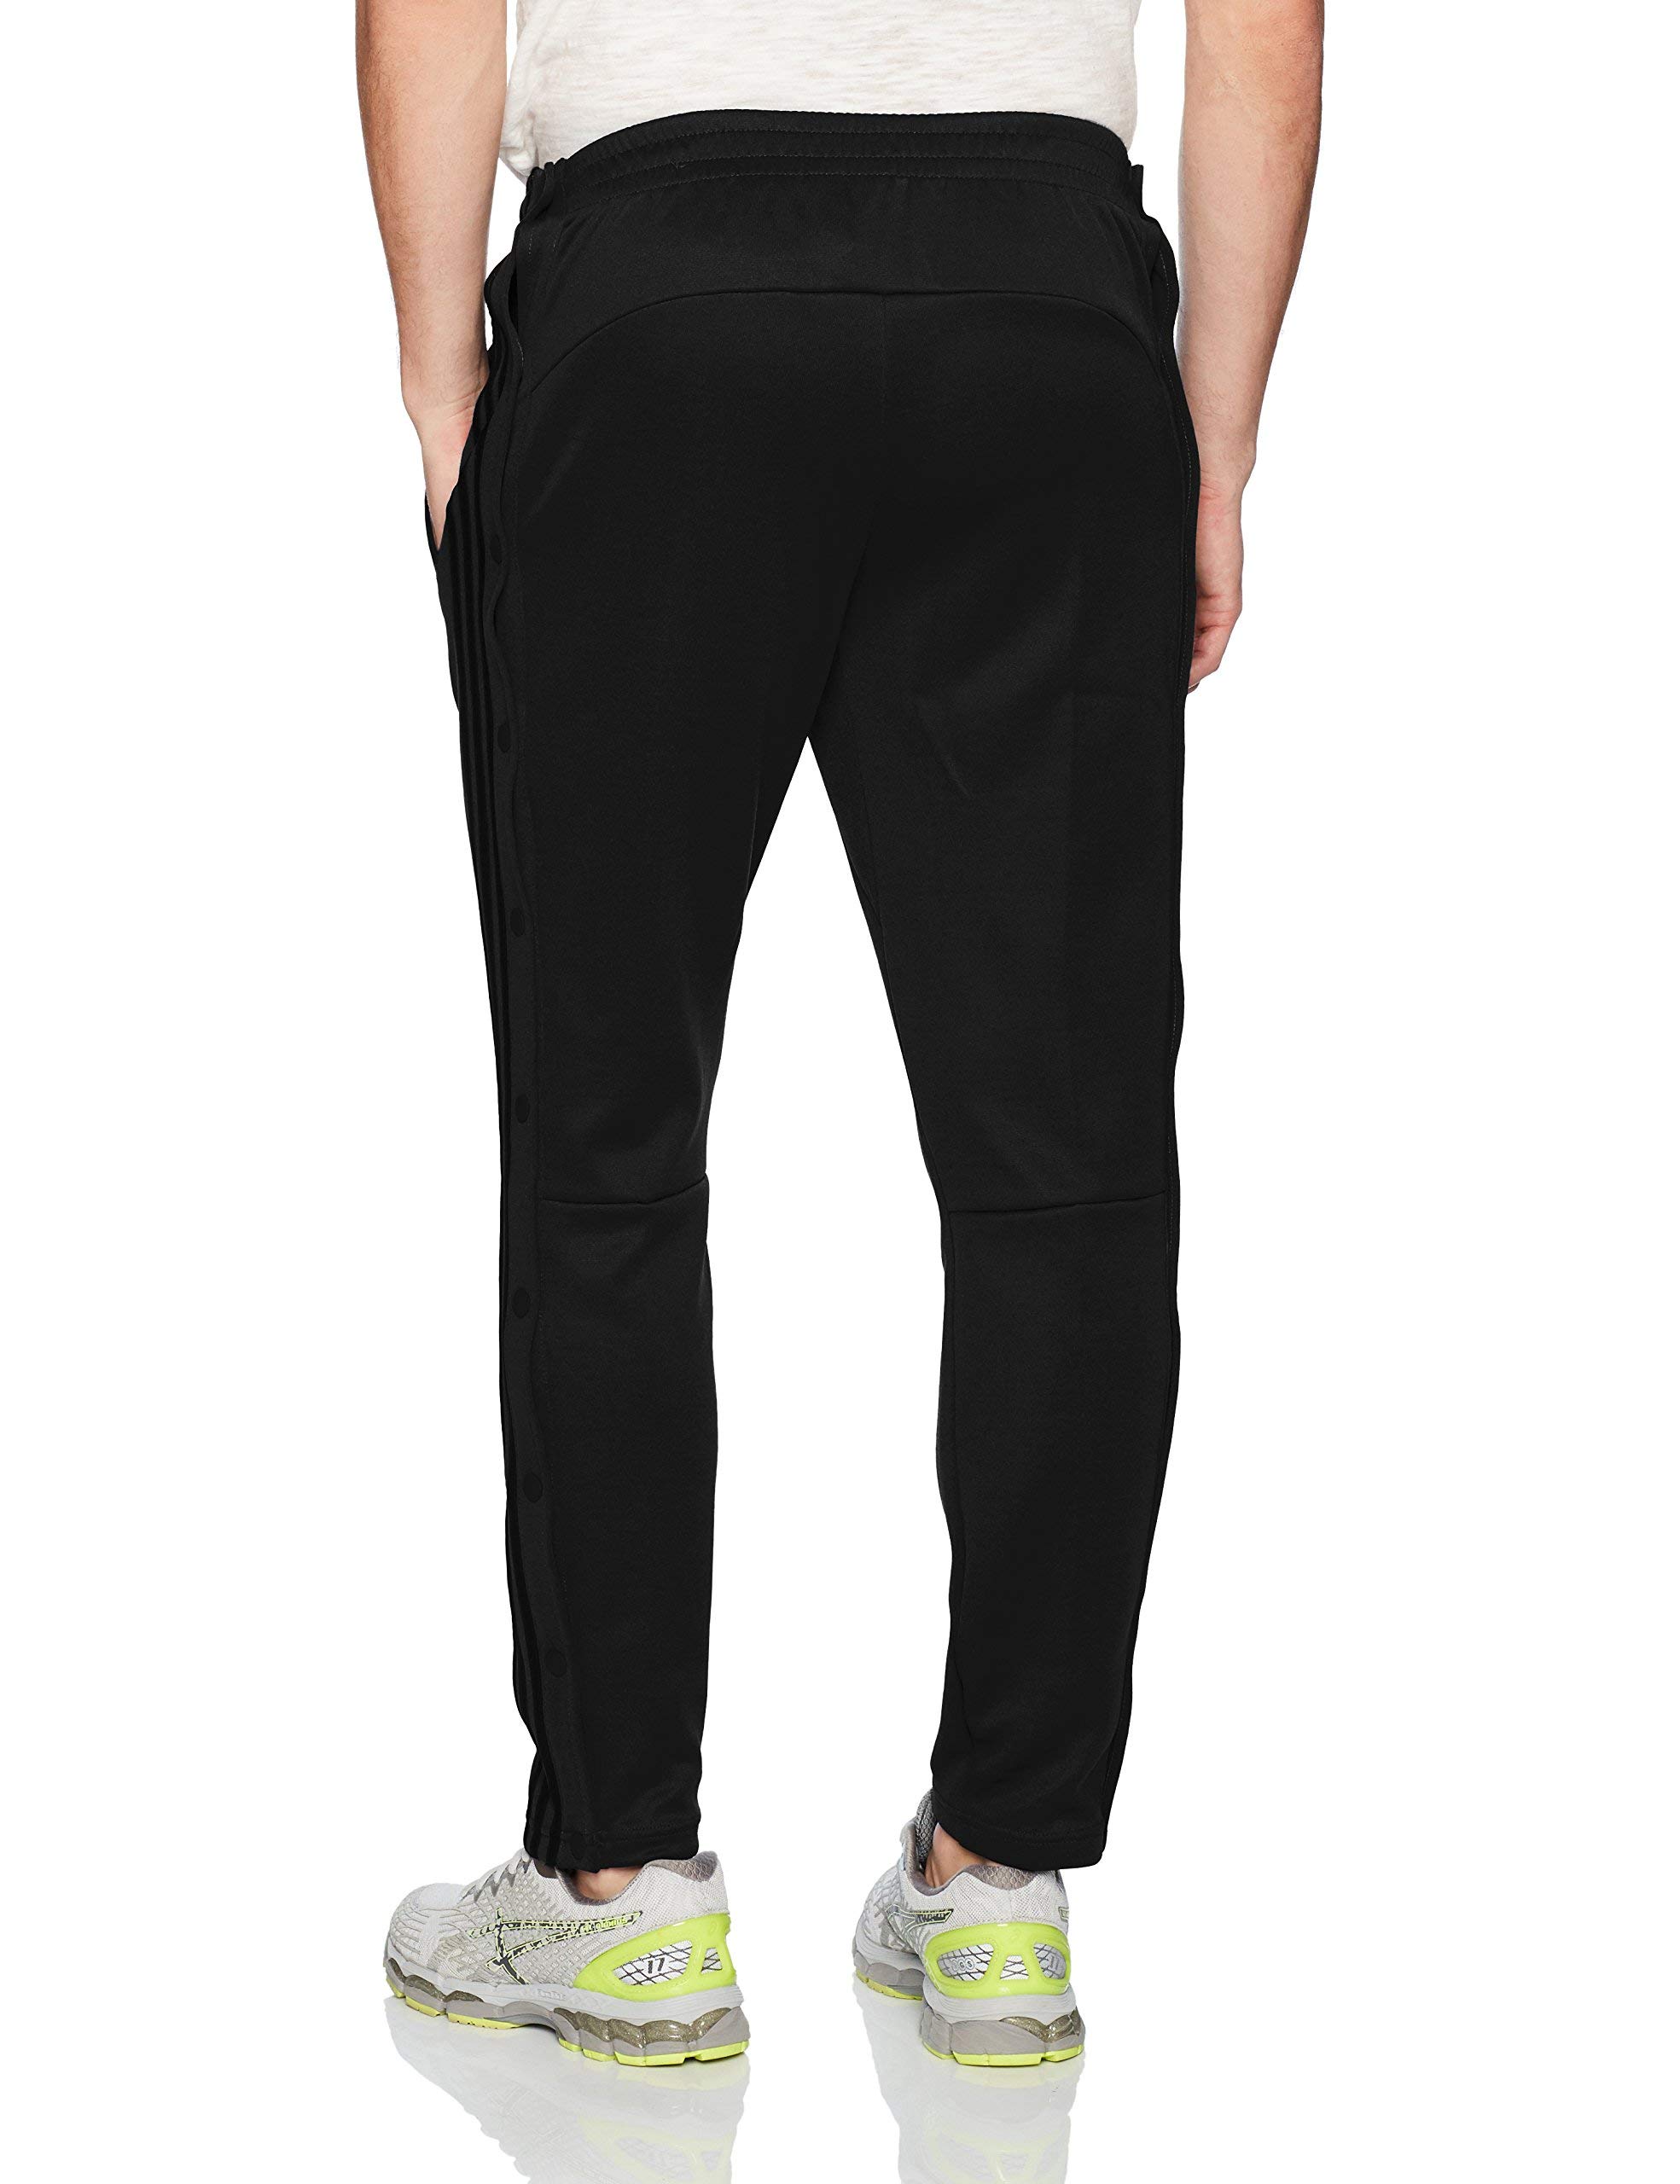 Buy Olive Cotton Blend T shirt and Track Pant Combo Online @ ₹659 from  ShopClues